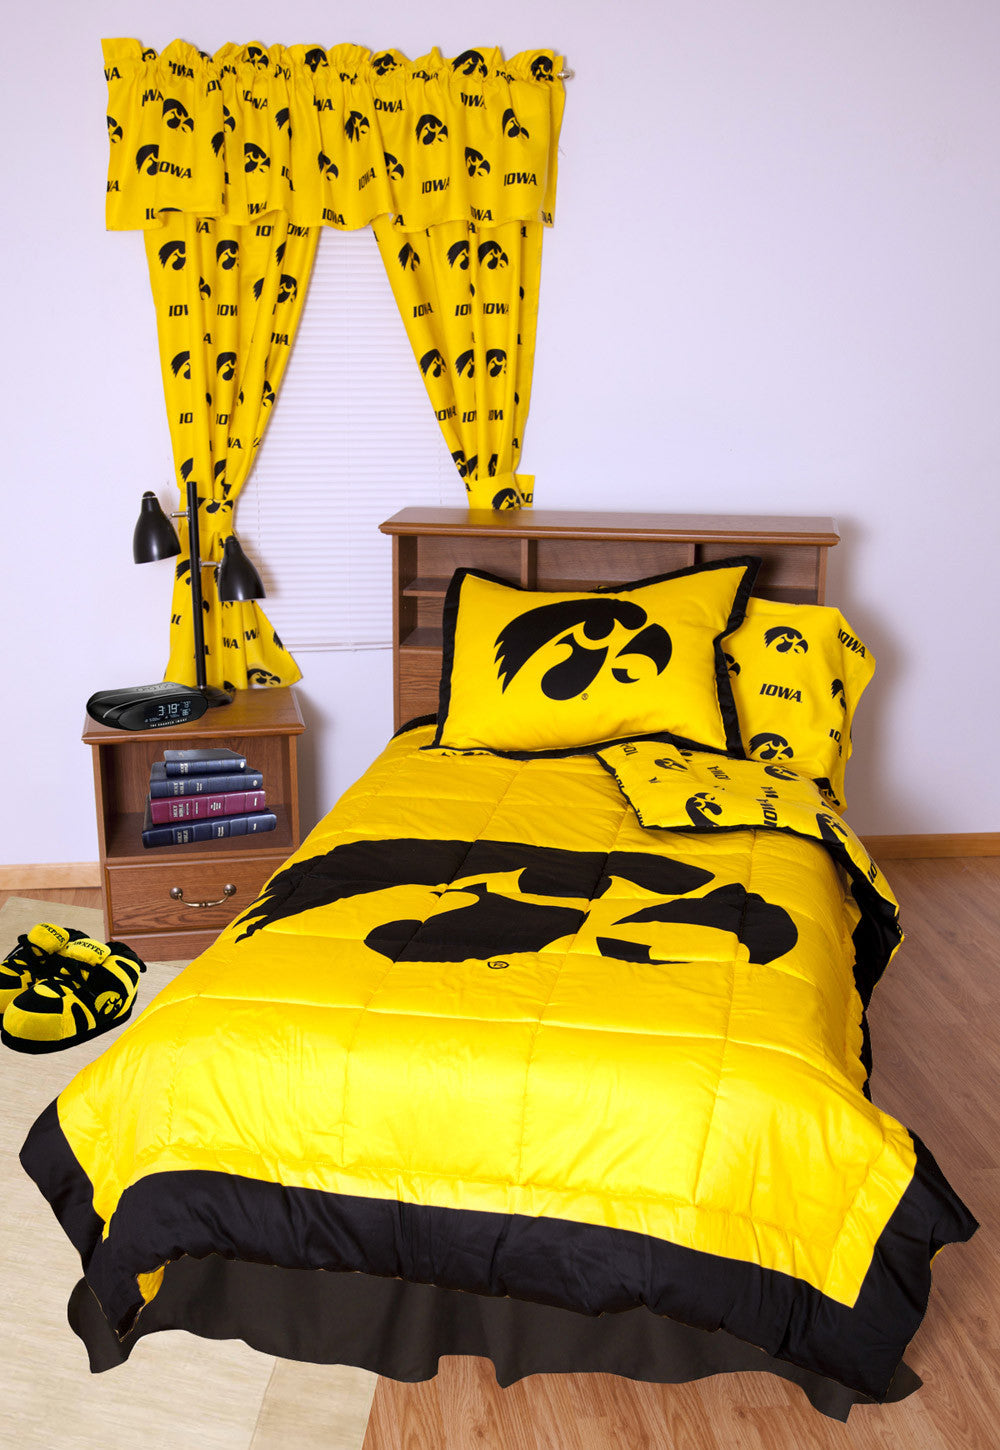 Iowa Bed In A Bag Queen - With Team Colored Sheets - Iowbbqu By College Covers